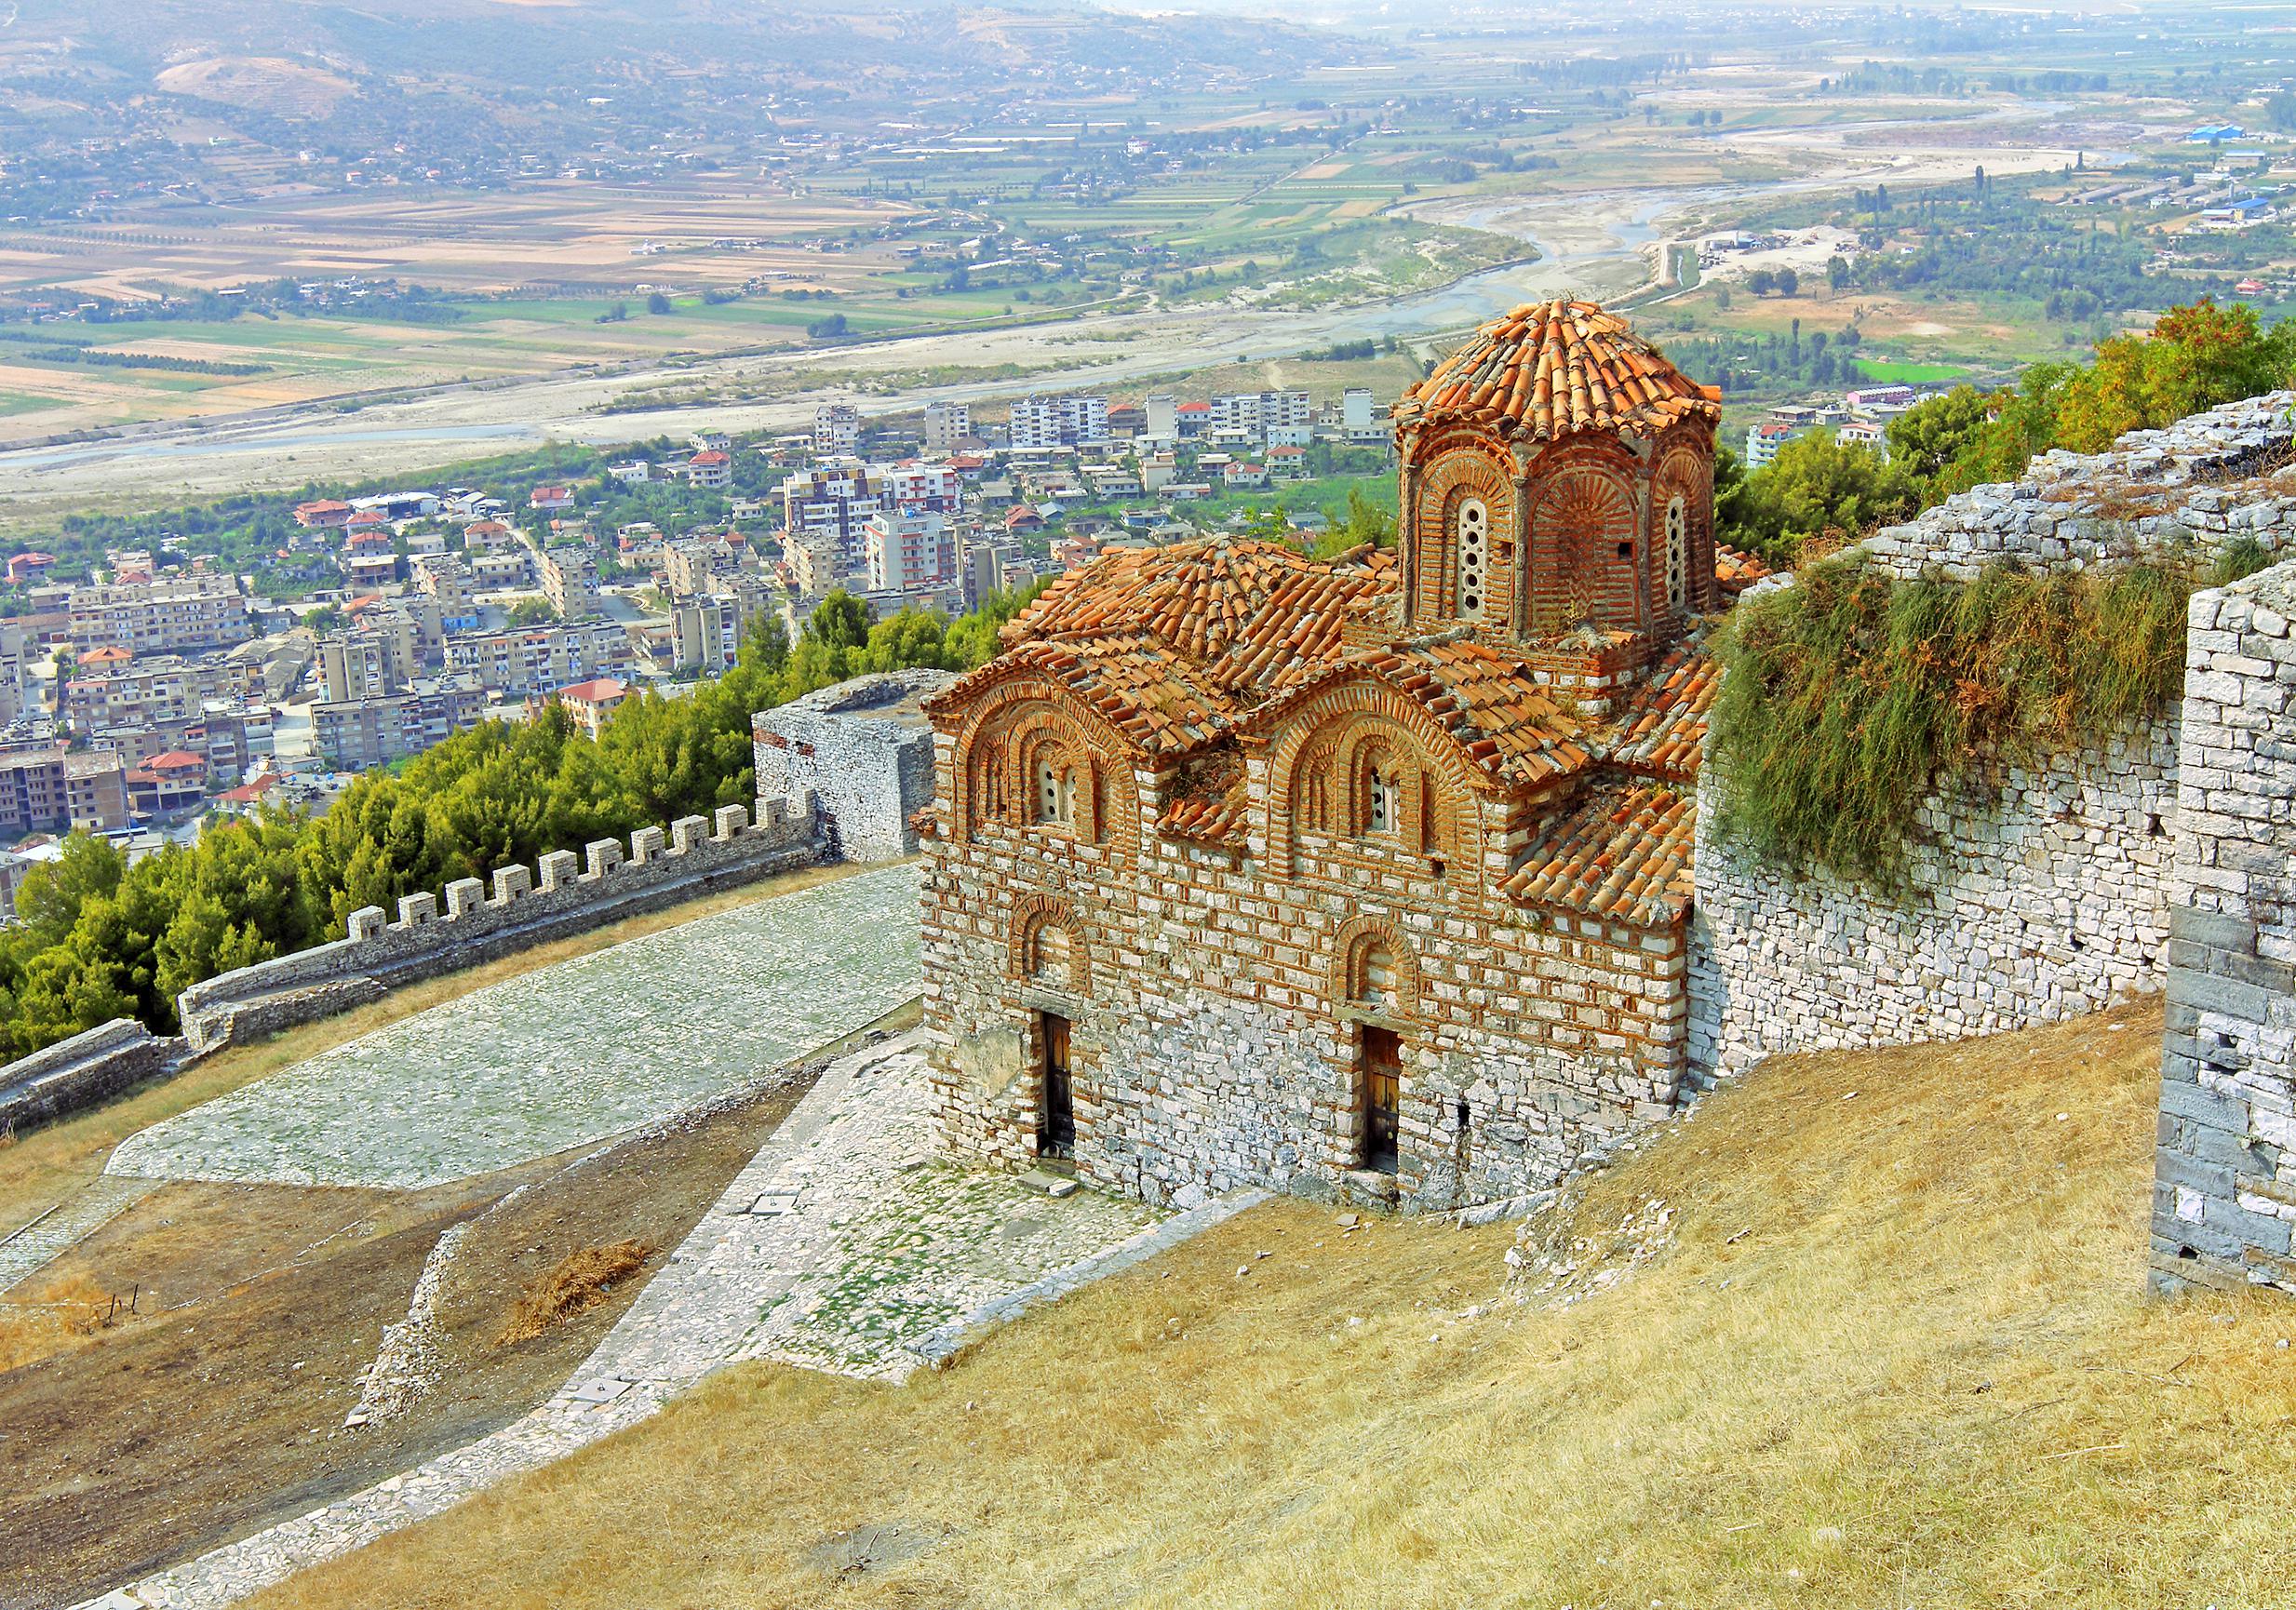 The stunning view of Berat Fortress Castle